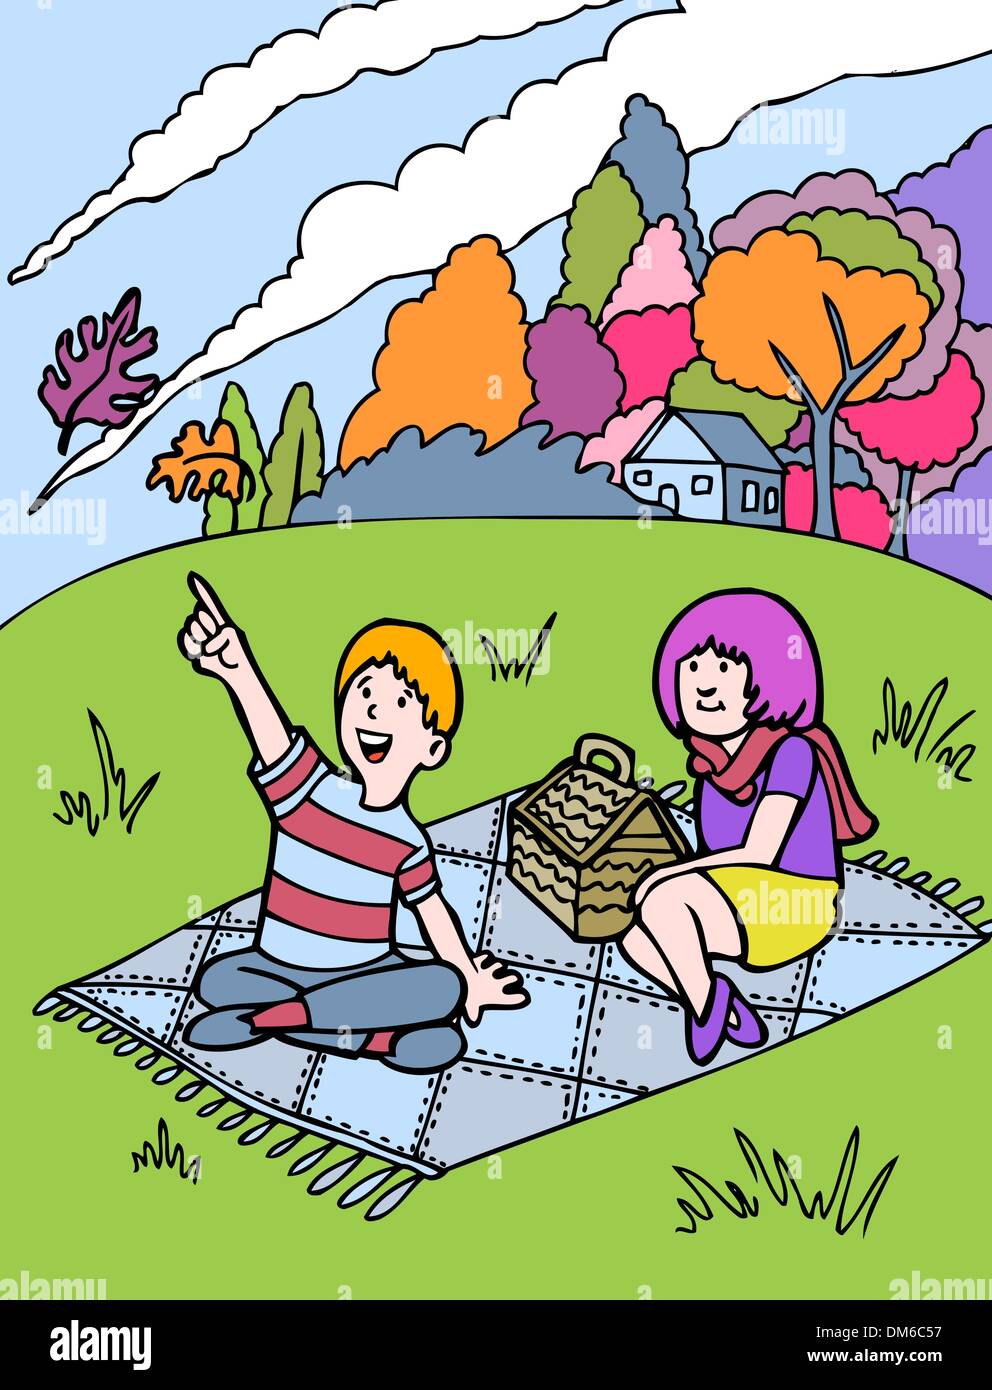 Kid Adventures: Fall Picnic with Friend Stock Vector